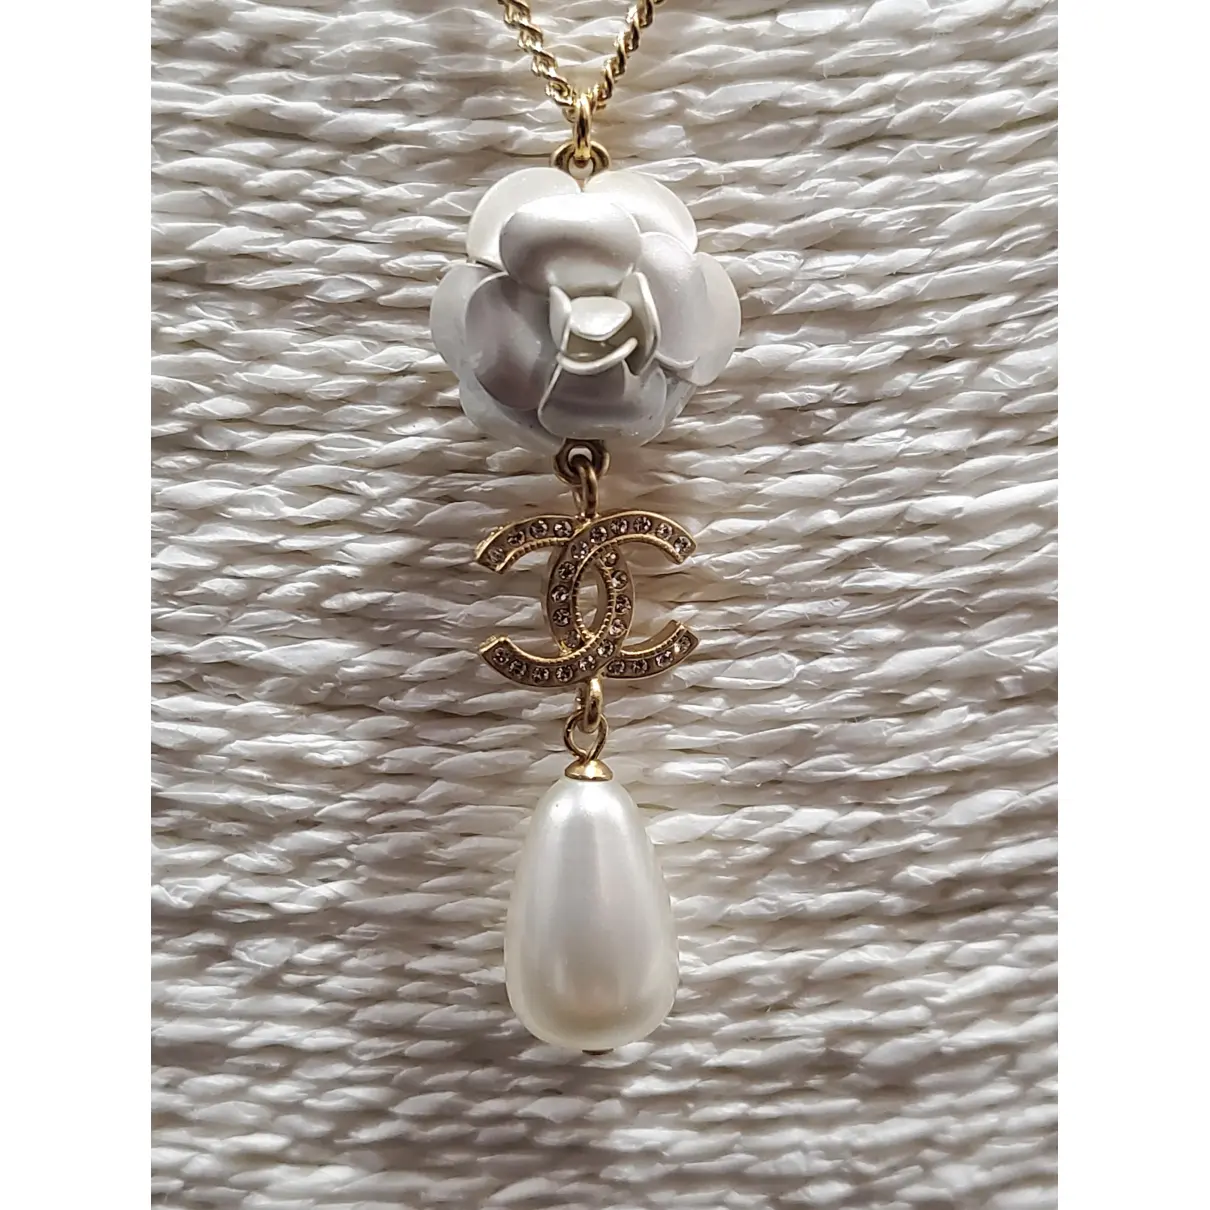 CC pearls necklace Chanel